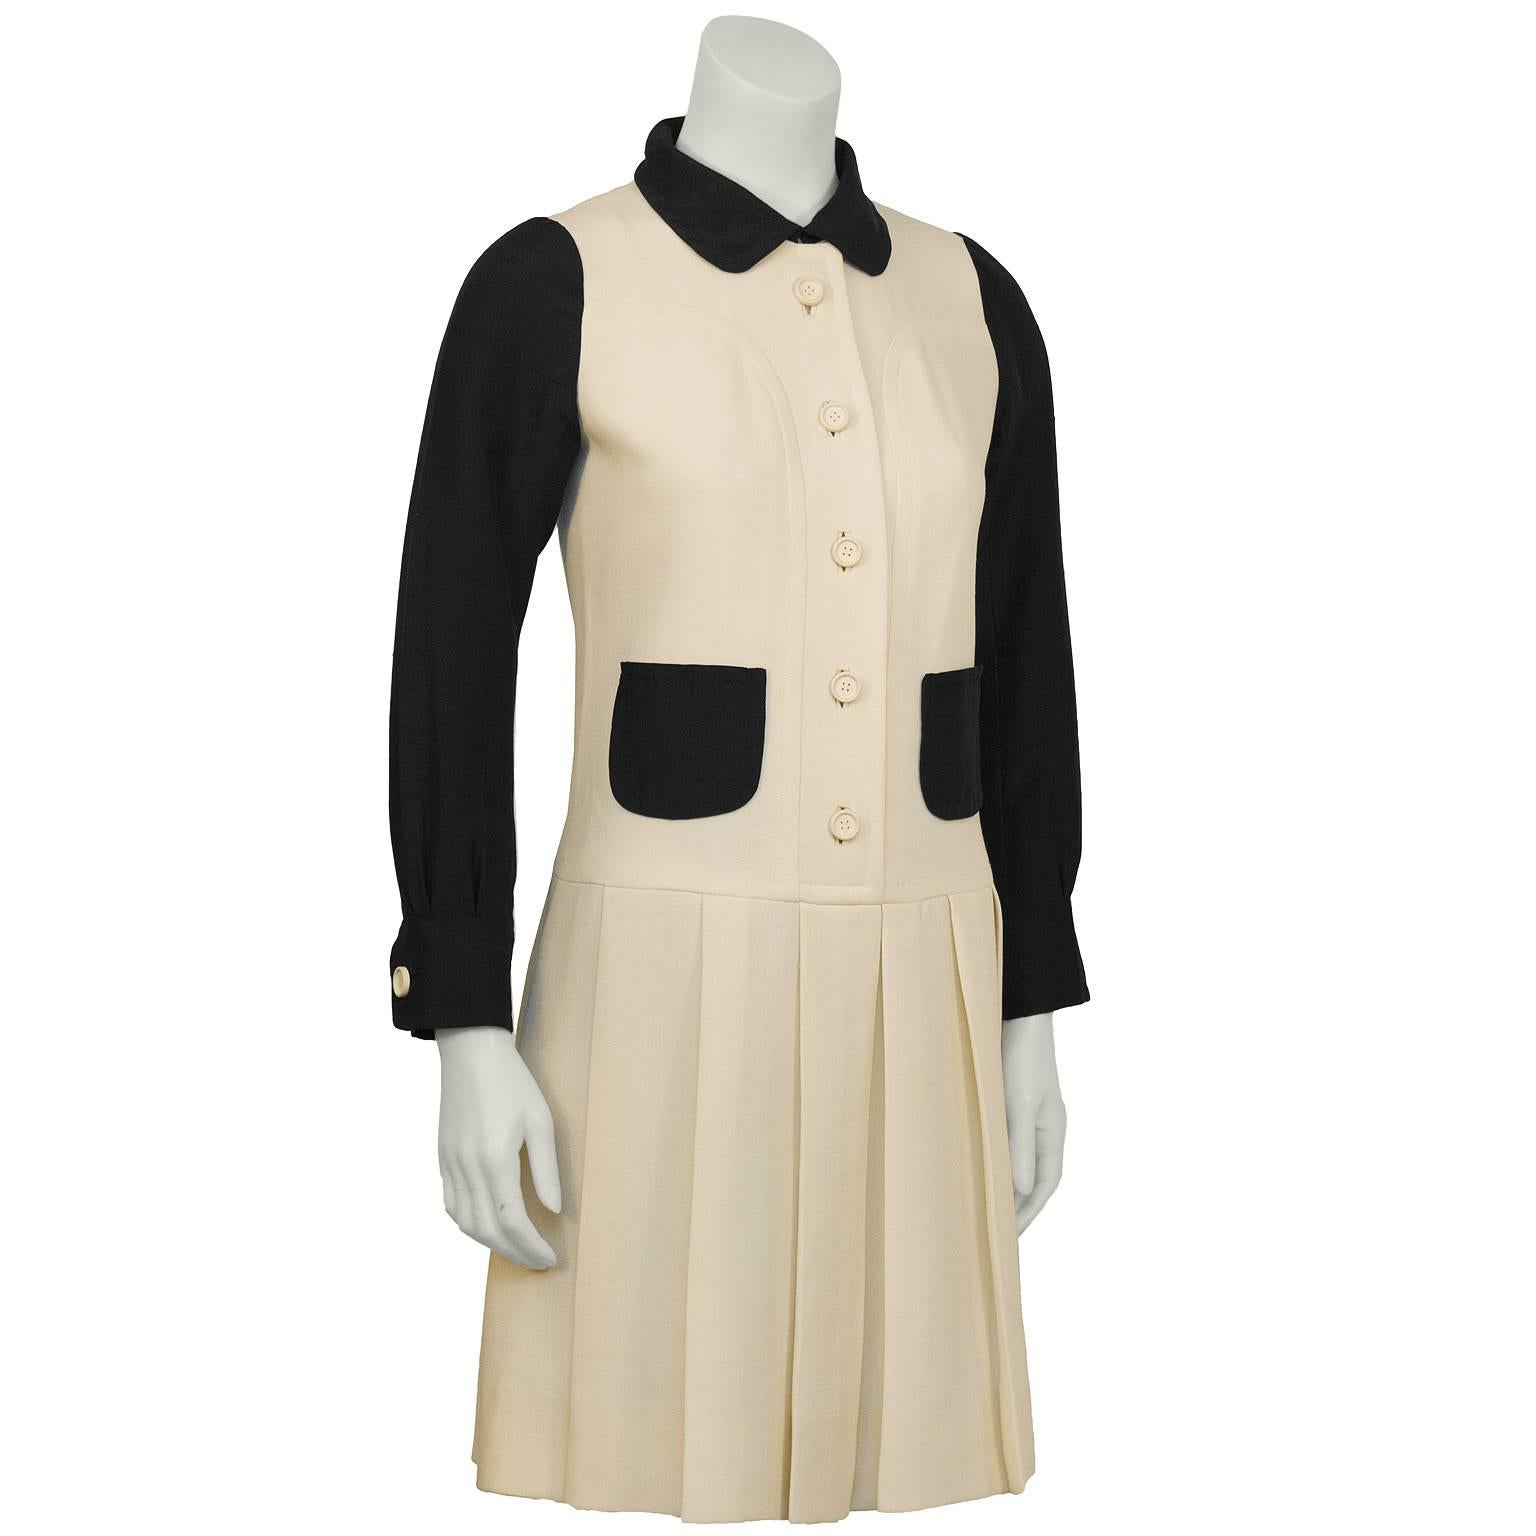 Ungaro Parallele black and cream drop-waist dress from the 1960's. The Courrèges inspired piece features black silk peter pan collar, sleeves, and front patch pockets as well as a half belt in the back. The dress buttons down the front with cream,